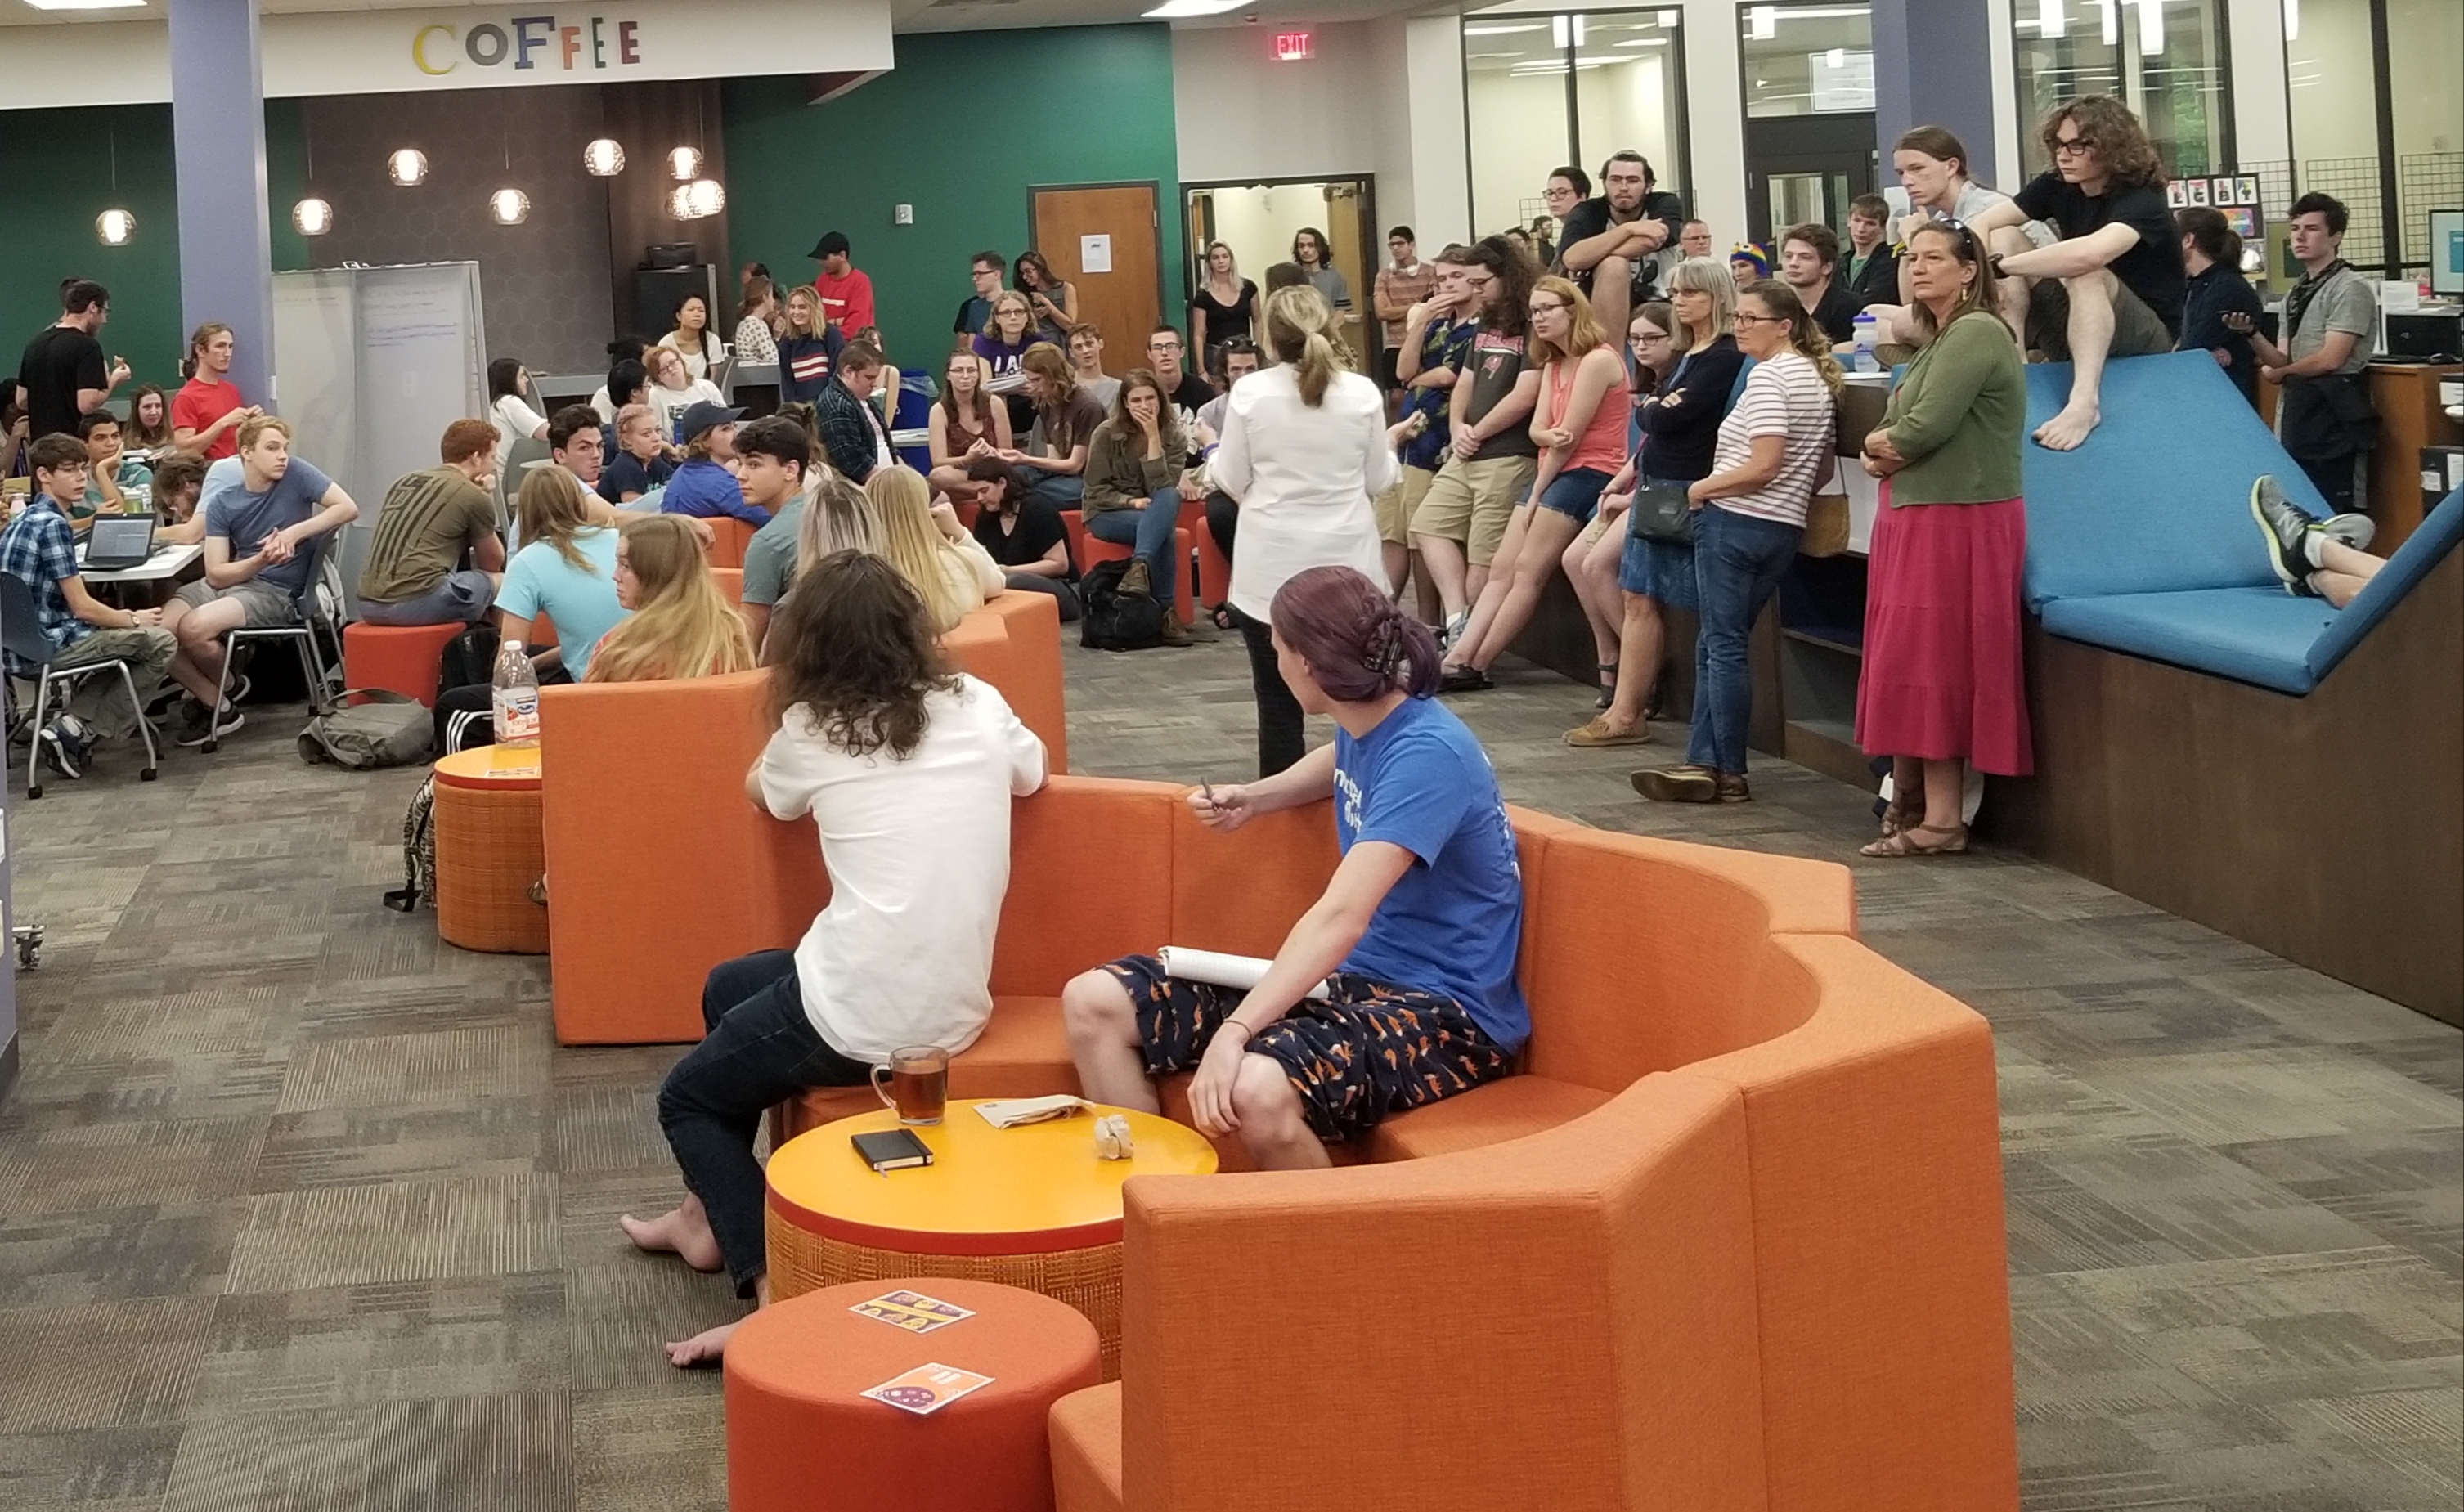 Pizza with the Provost: Over 120 students showed up to voice concerns about library changes